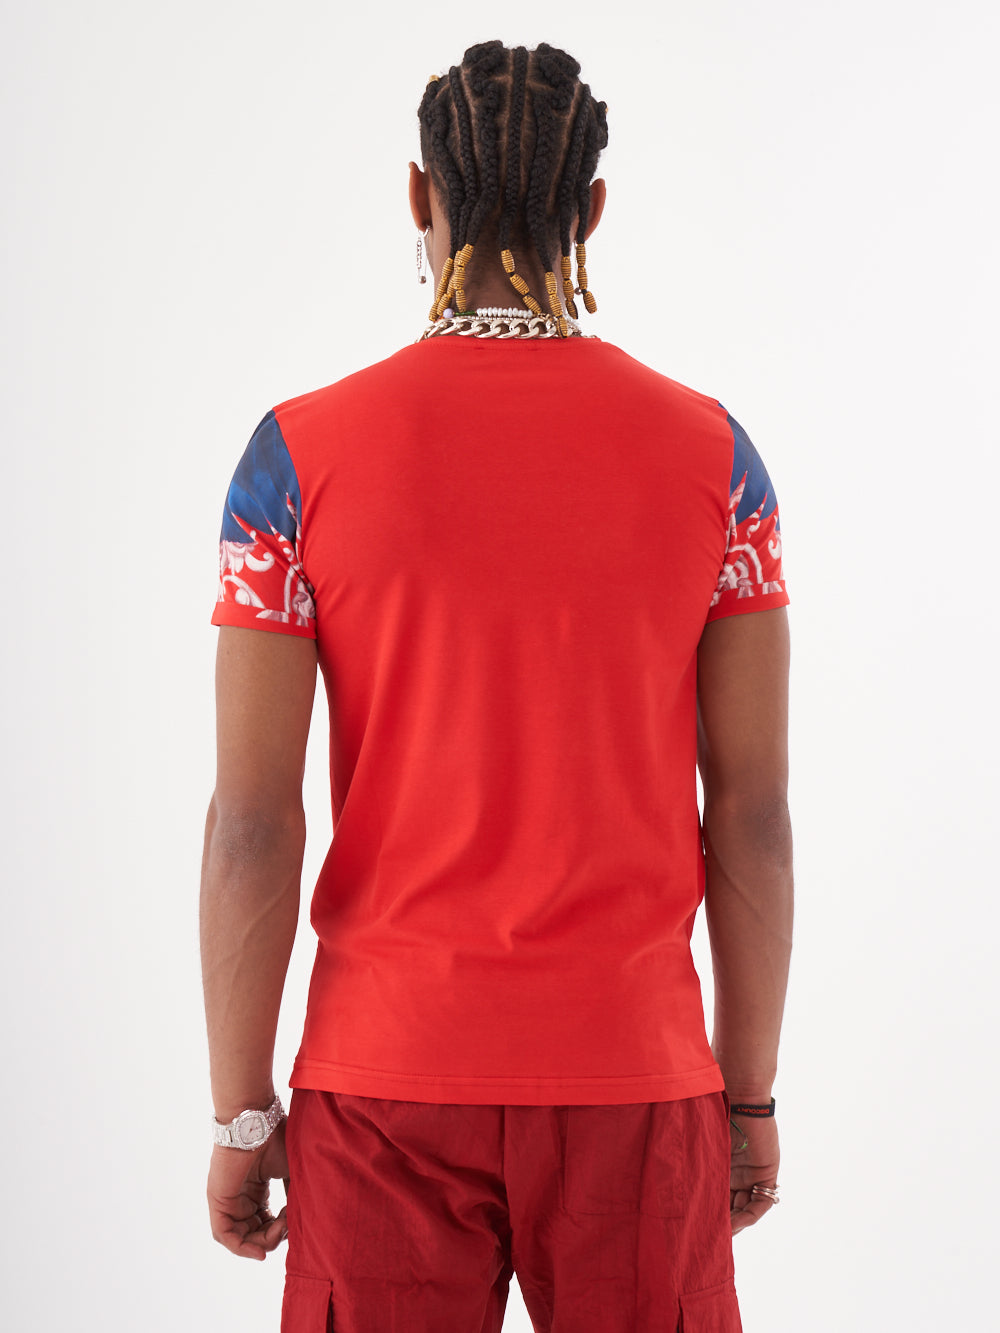 The back view of a man wearing the EUPHORIA T-SHIRT | RED with a skeleton print.